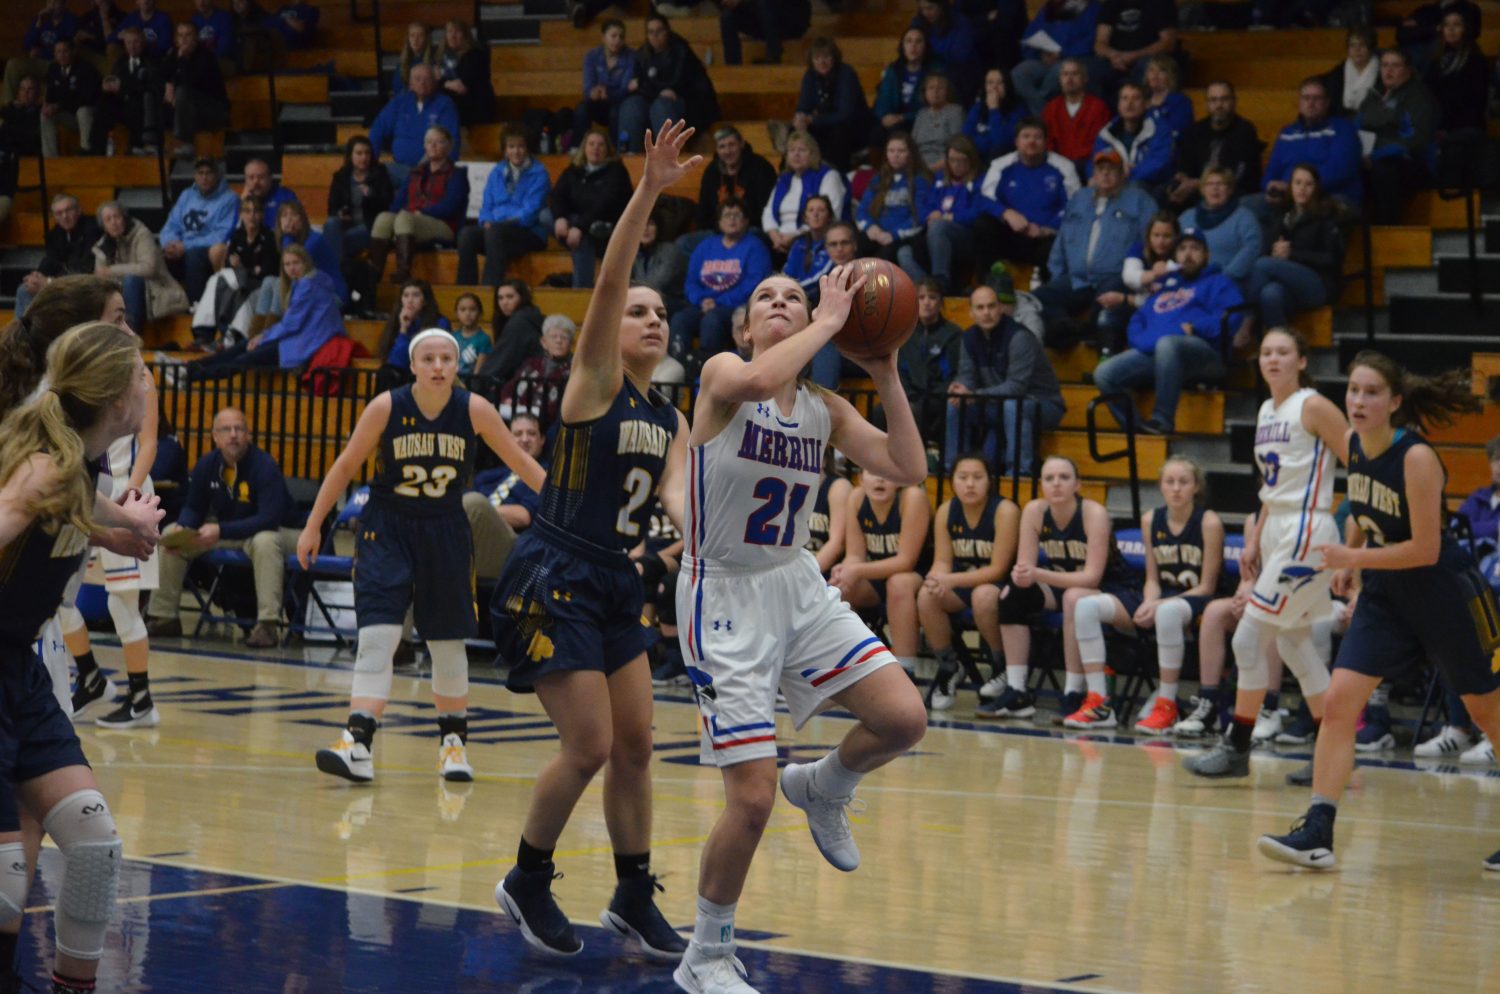 Lady Jays fall to West